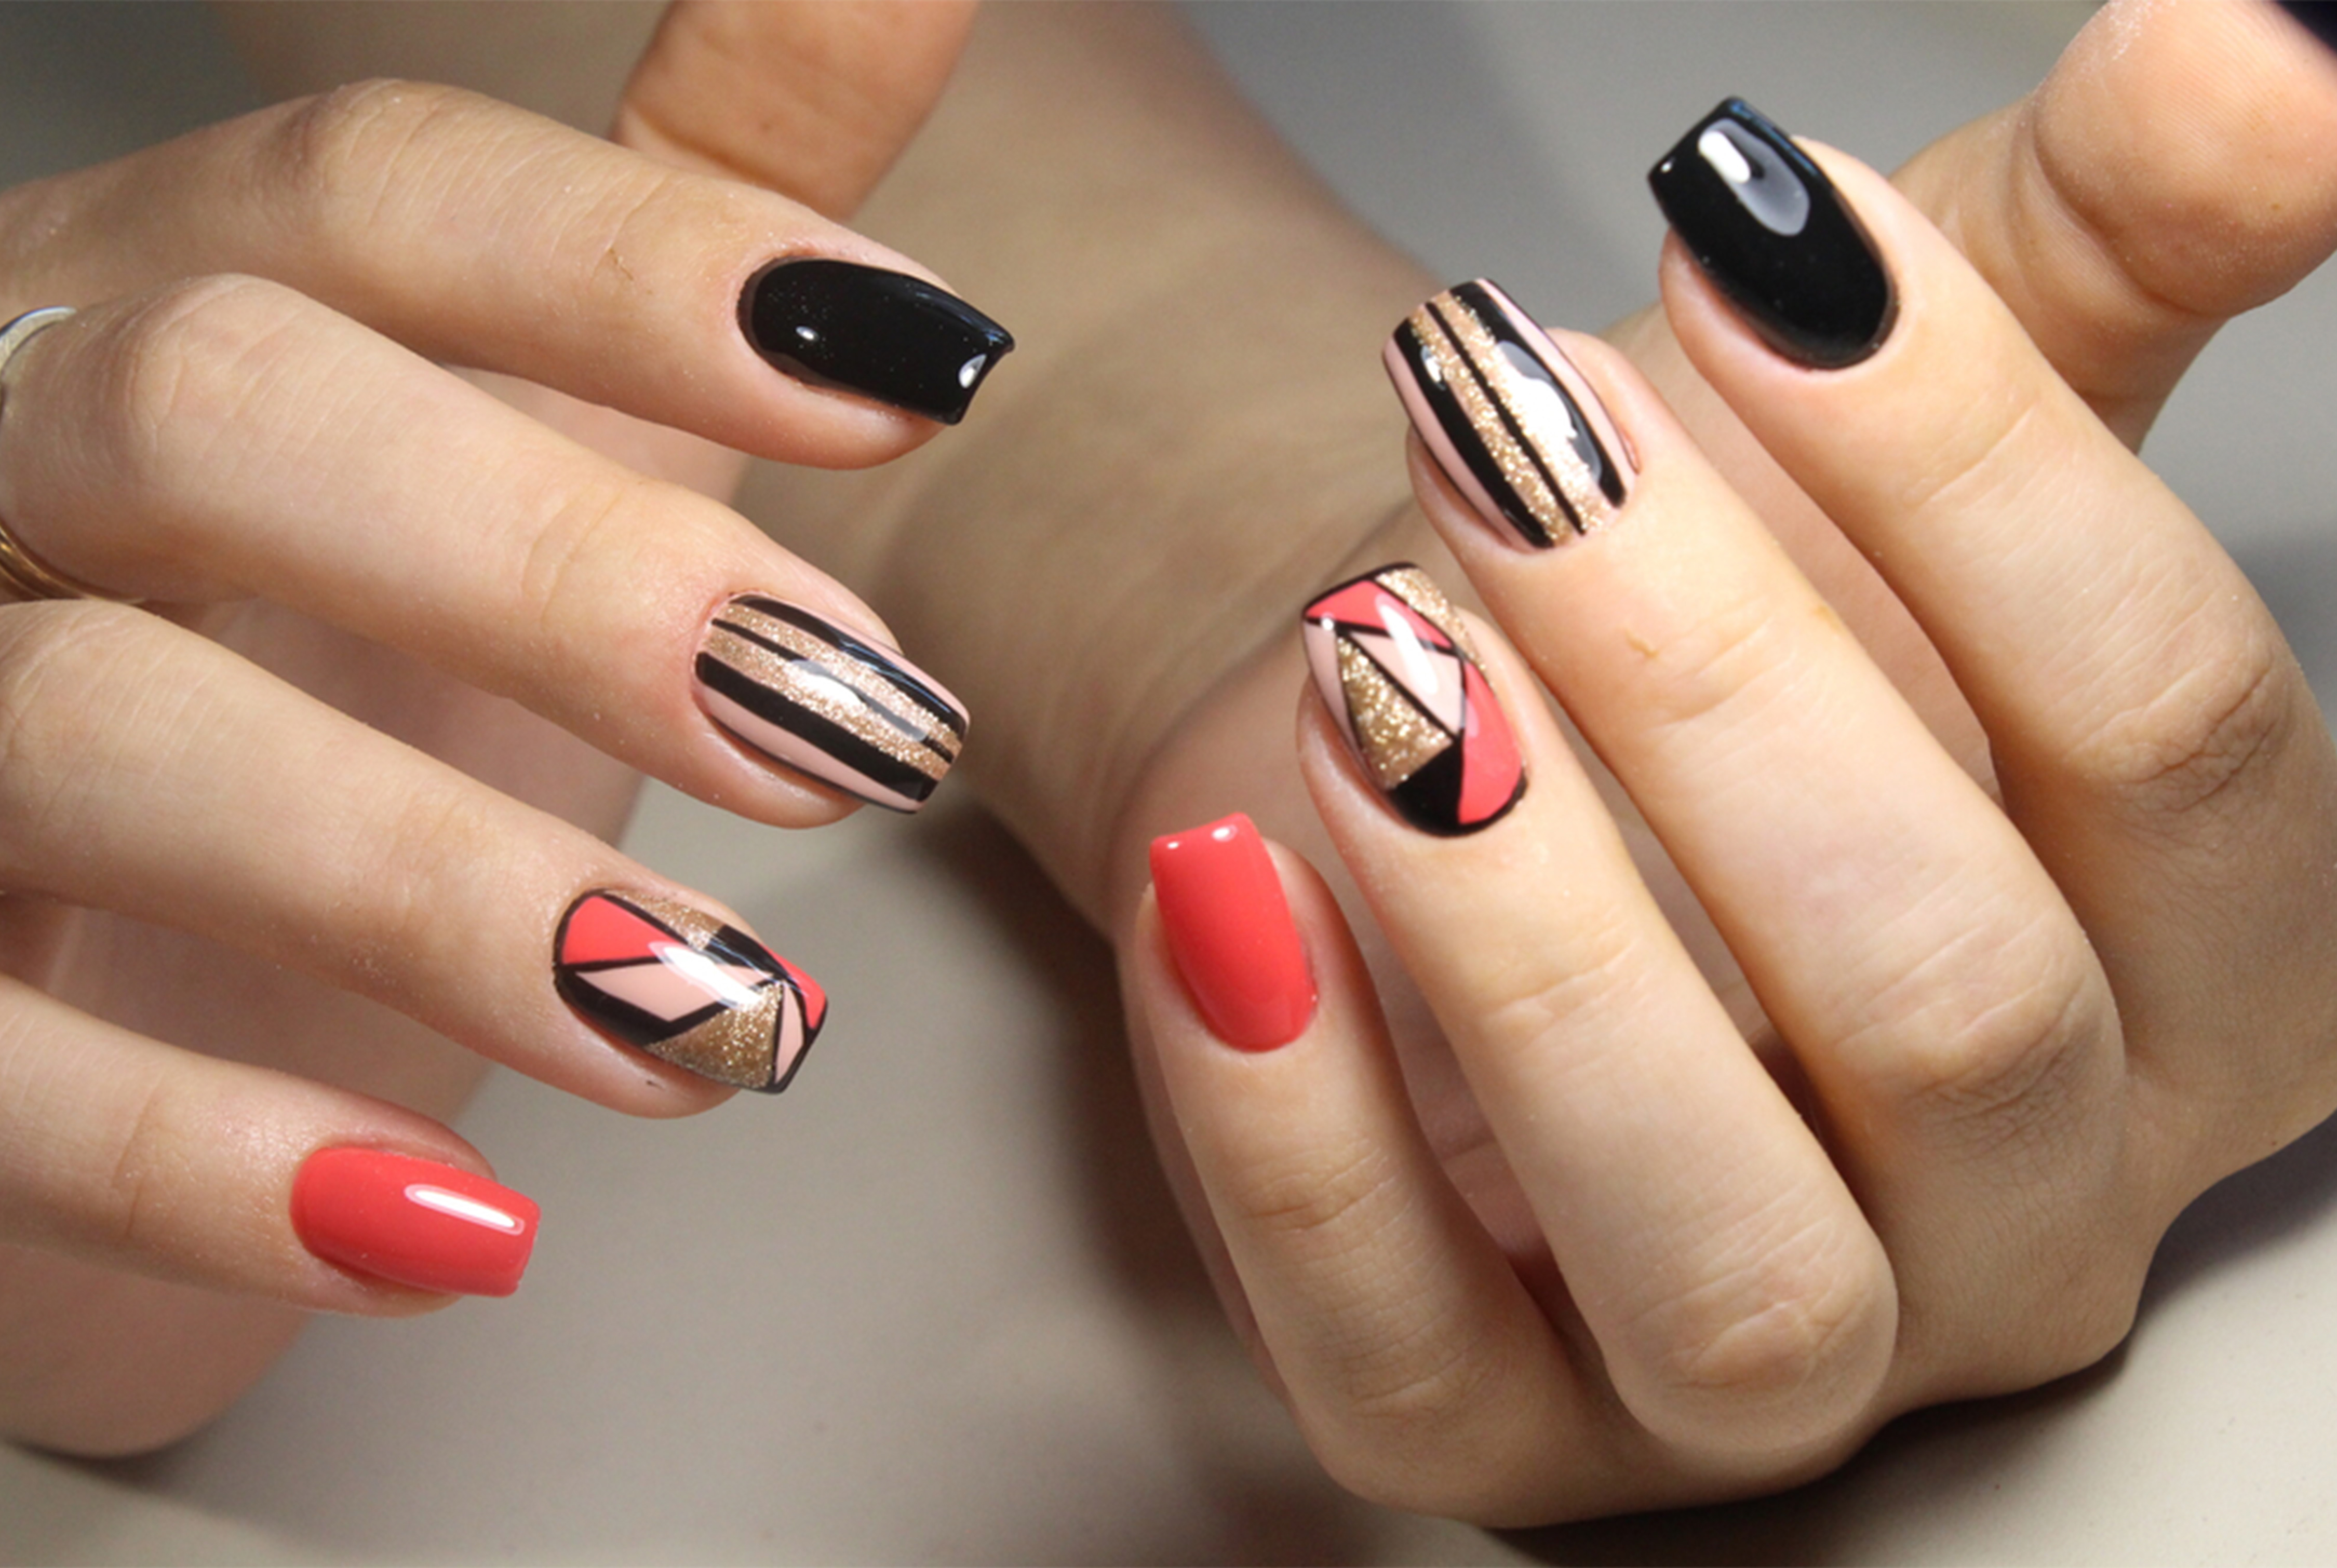 8. 1 Hour Nail Art Inspiration: Instagram Accounts to Follow for Ideas - wide 5